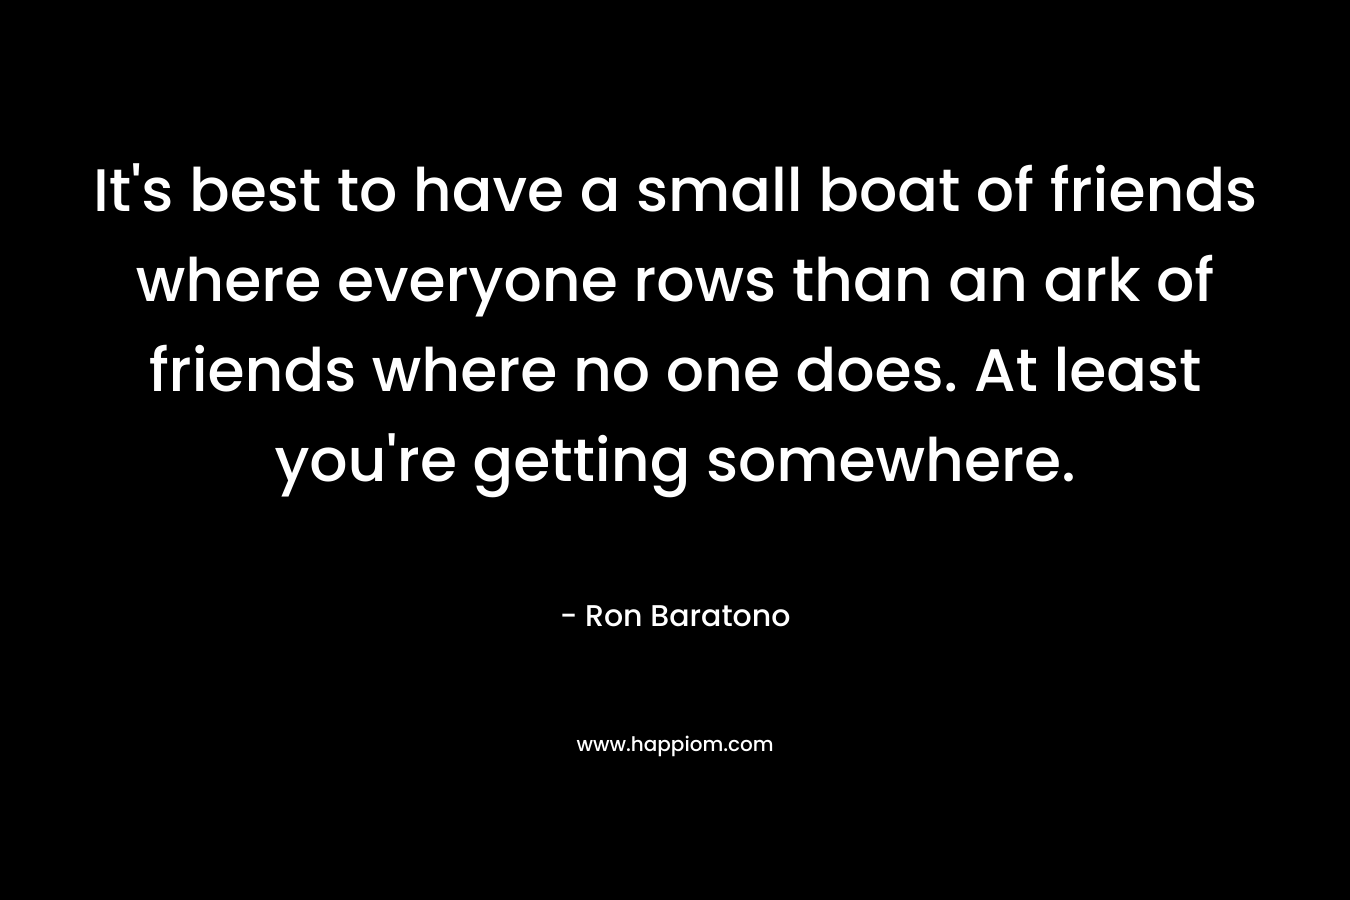 It's best to have a small boat of friends where everyone rows than an ark of friends where no one does. At least you're getting somewhere.